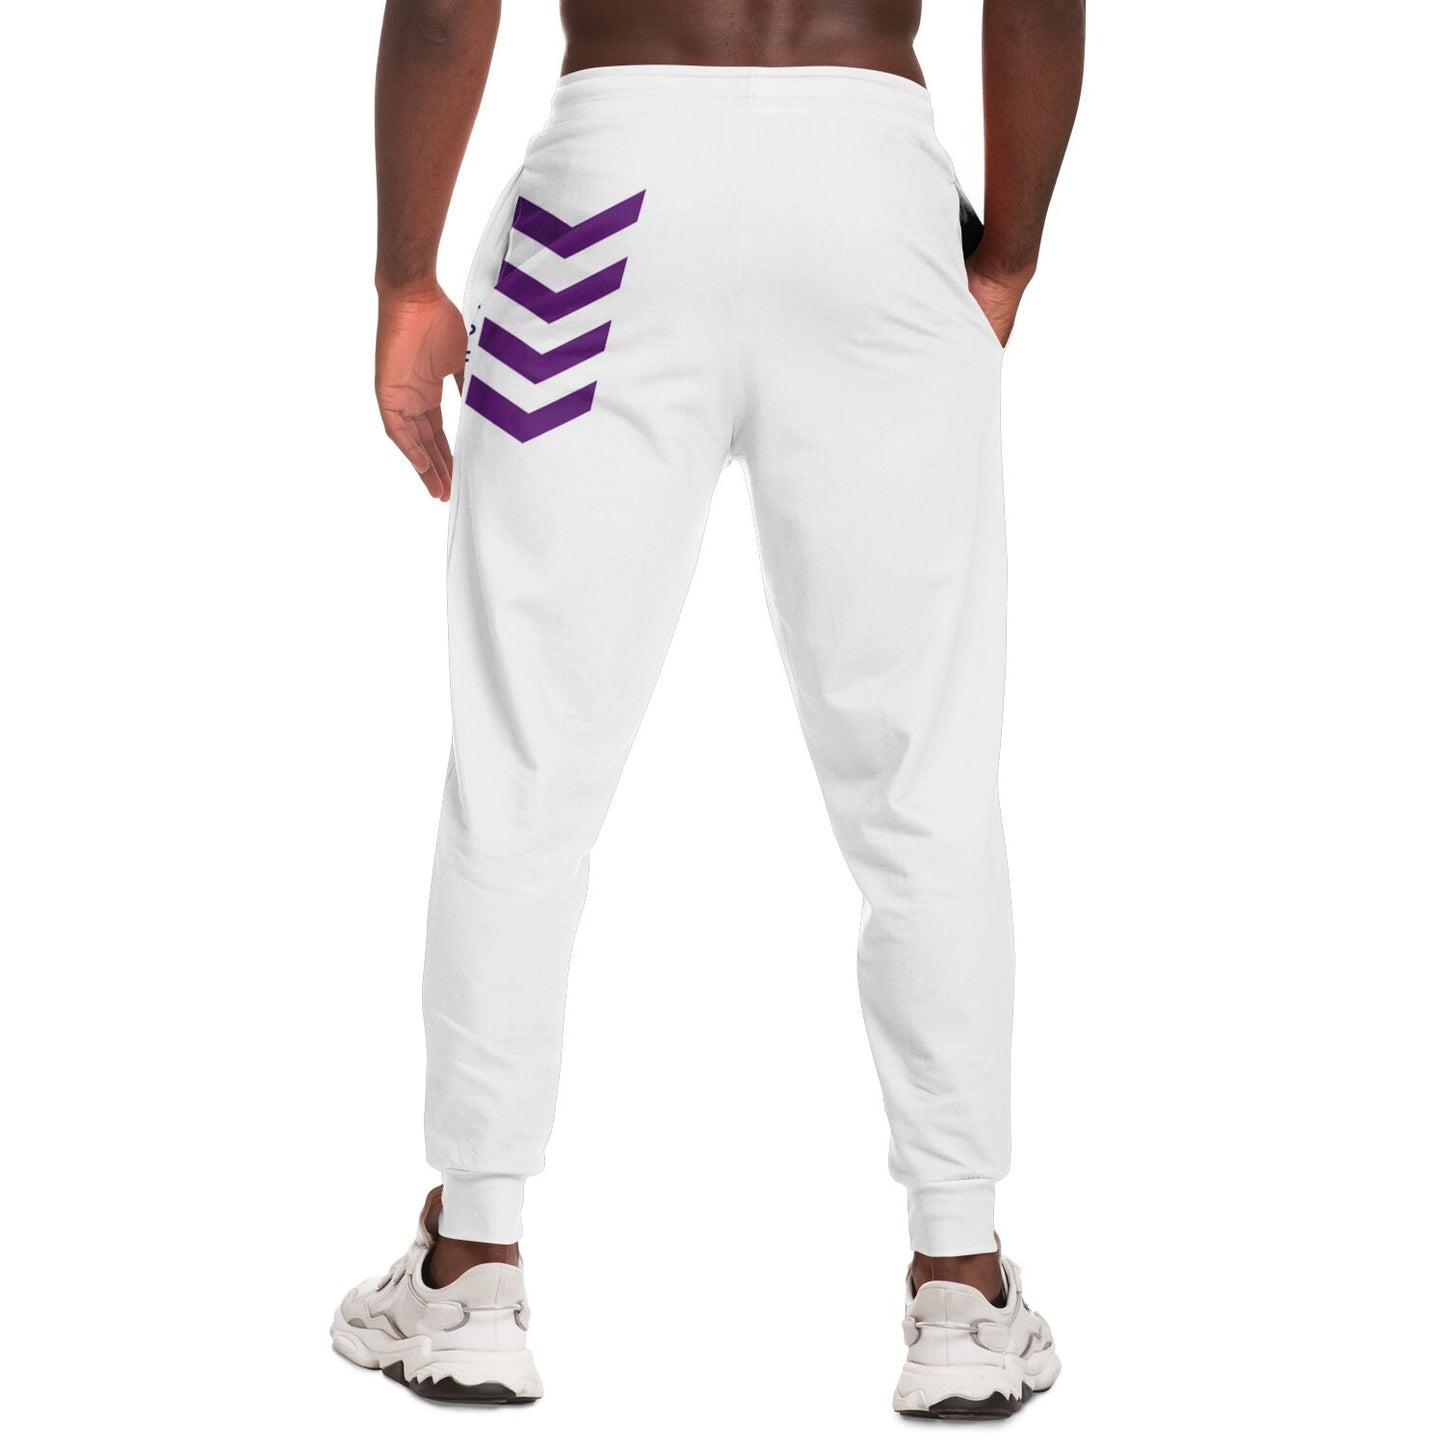 Adult SpankQueen 'Colorful Kitsune' Fashion Joggers